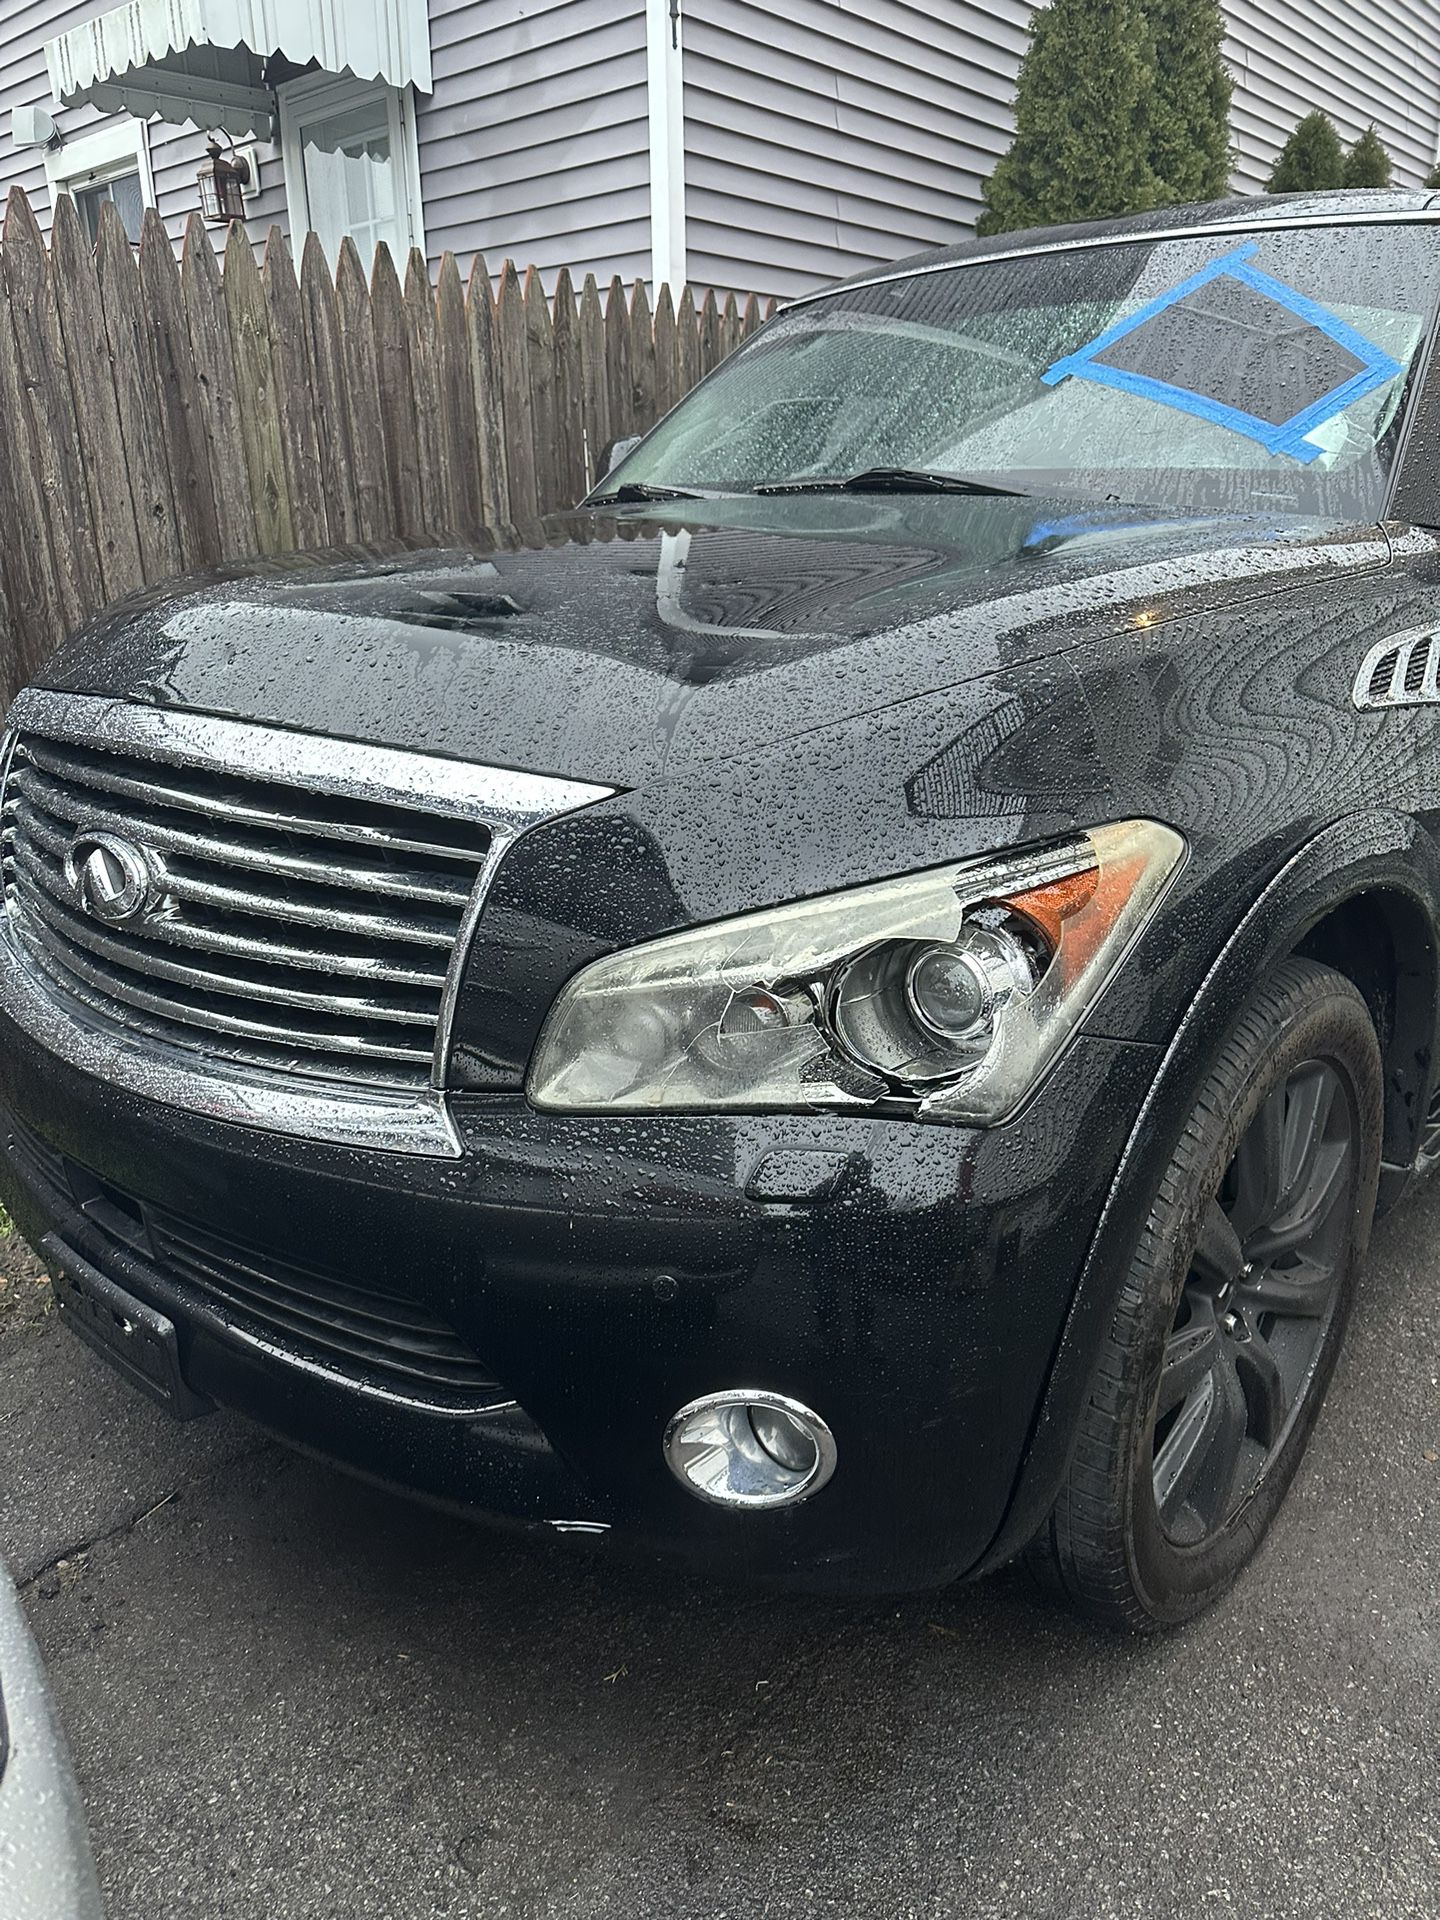 2012 Infiniti Qx56 ——- Parts Only ——